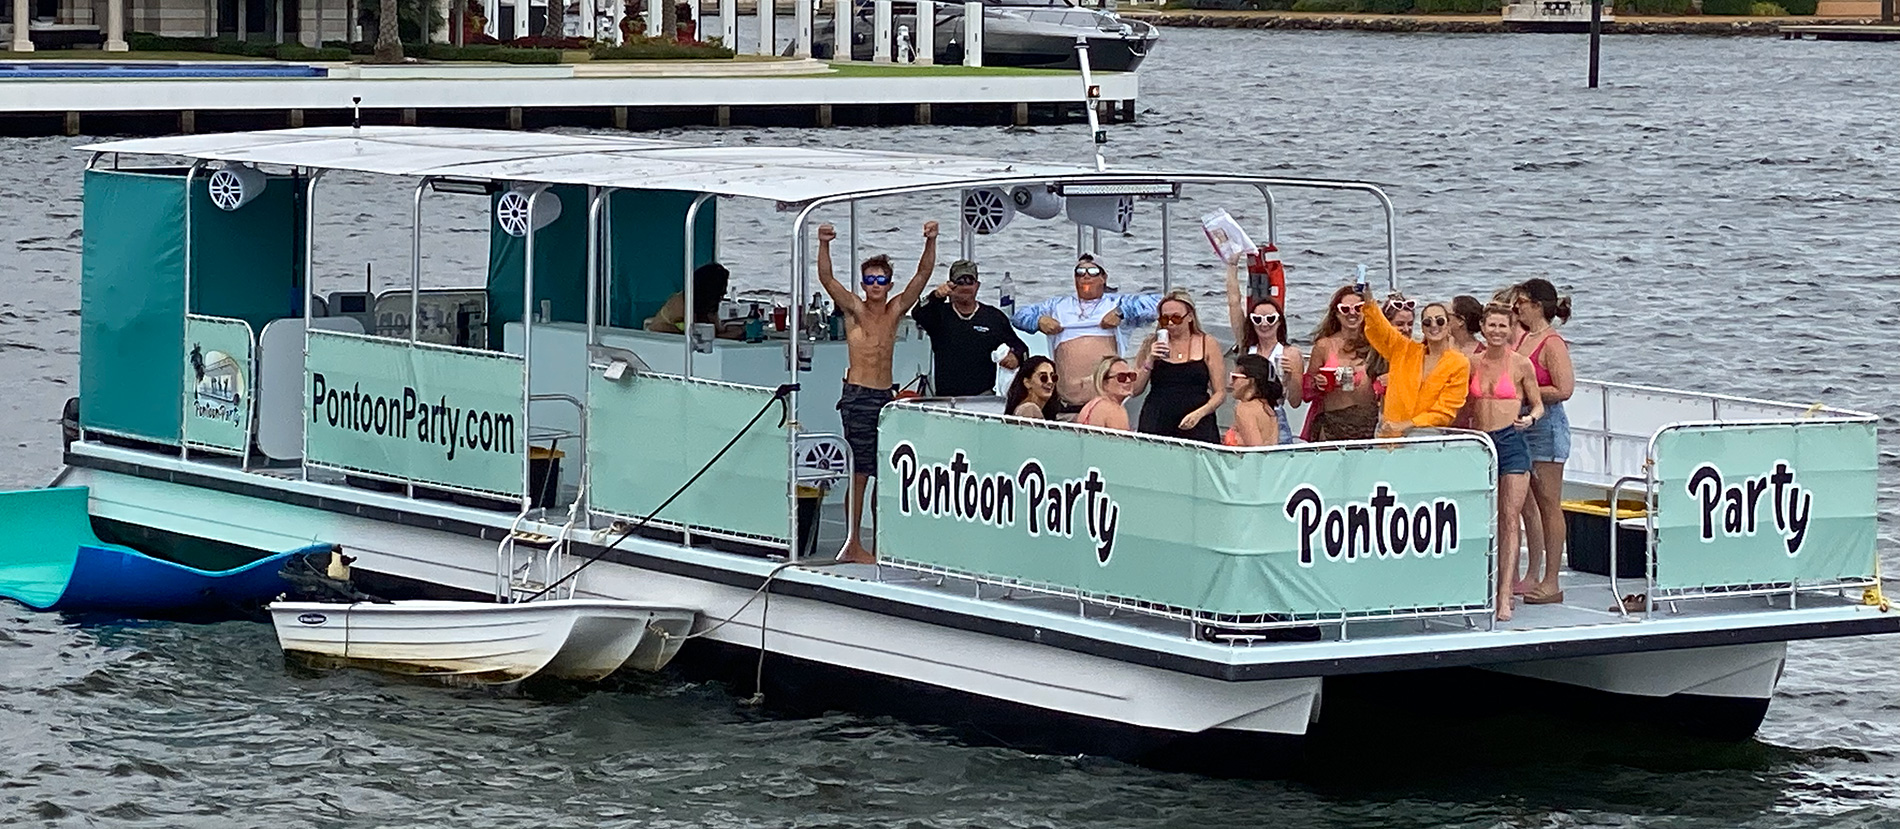 bahama mamma 53' pontoon party boat charter rental in fort lauderdale